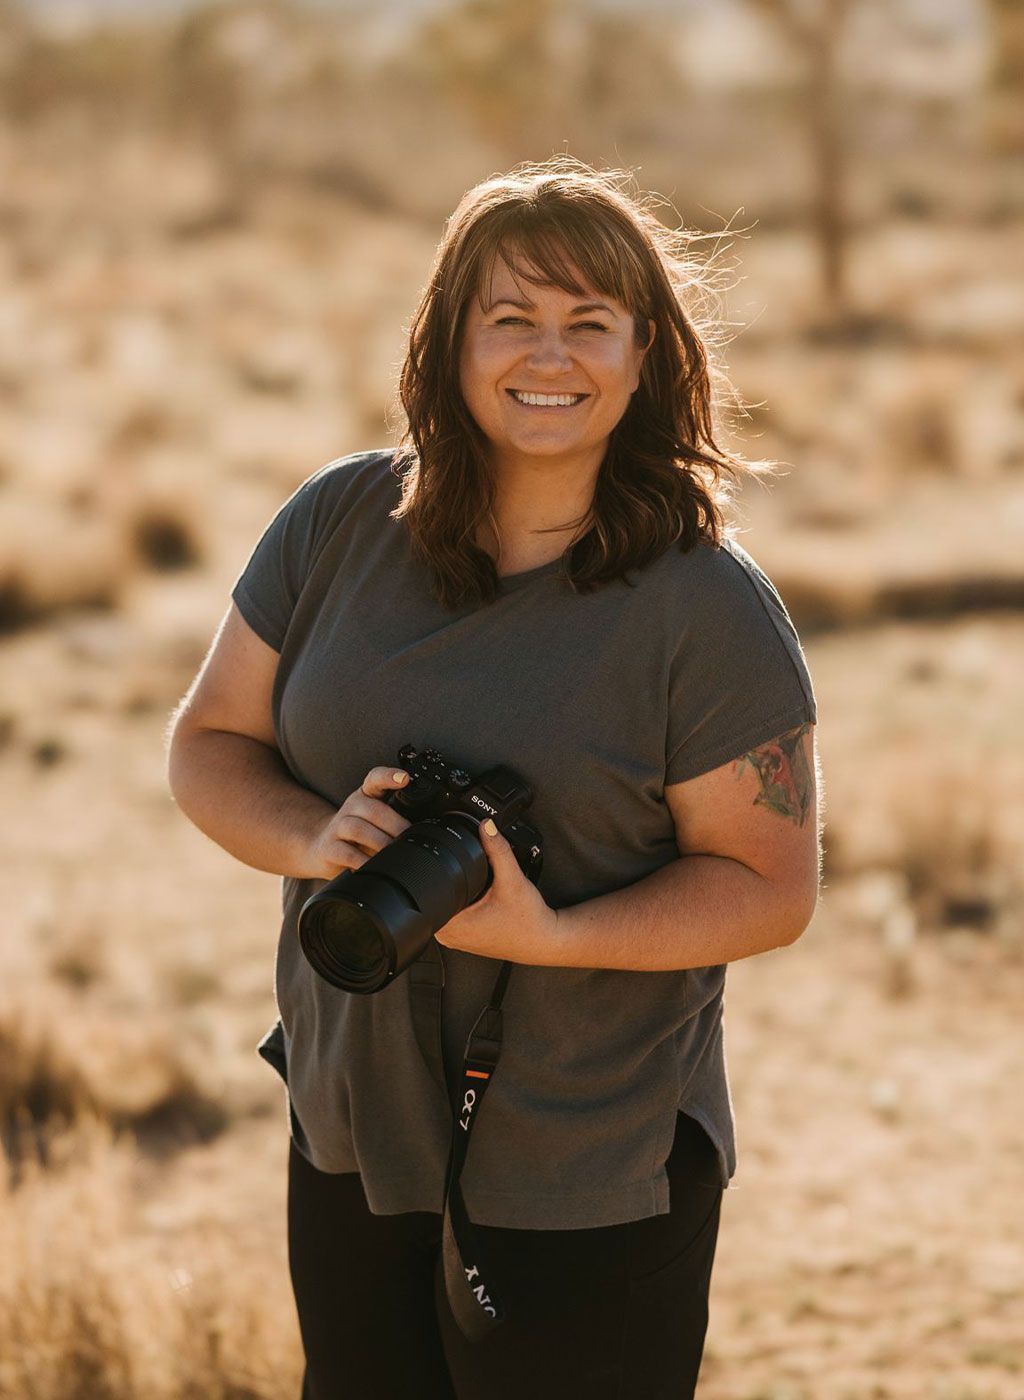 a woman is holding a camera in a field and smiling .